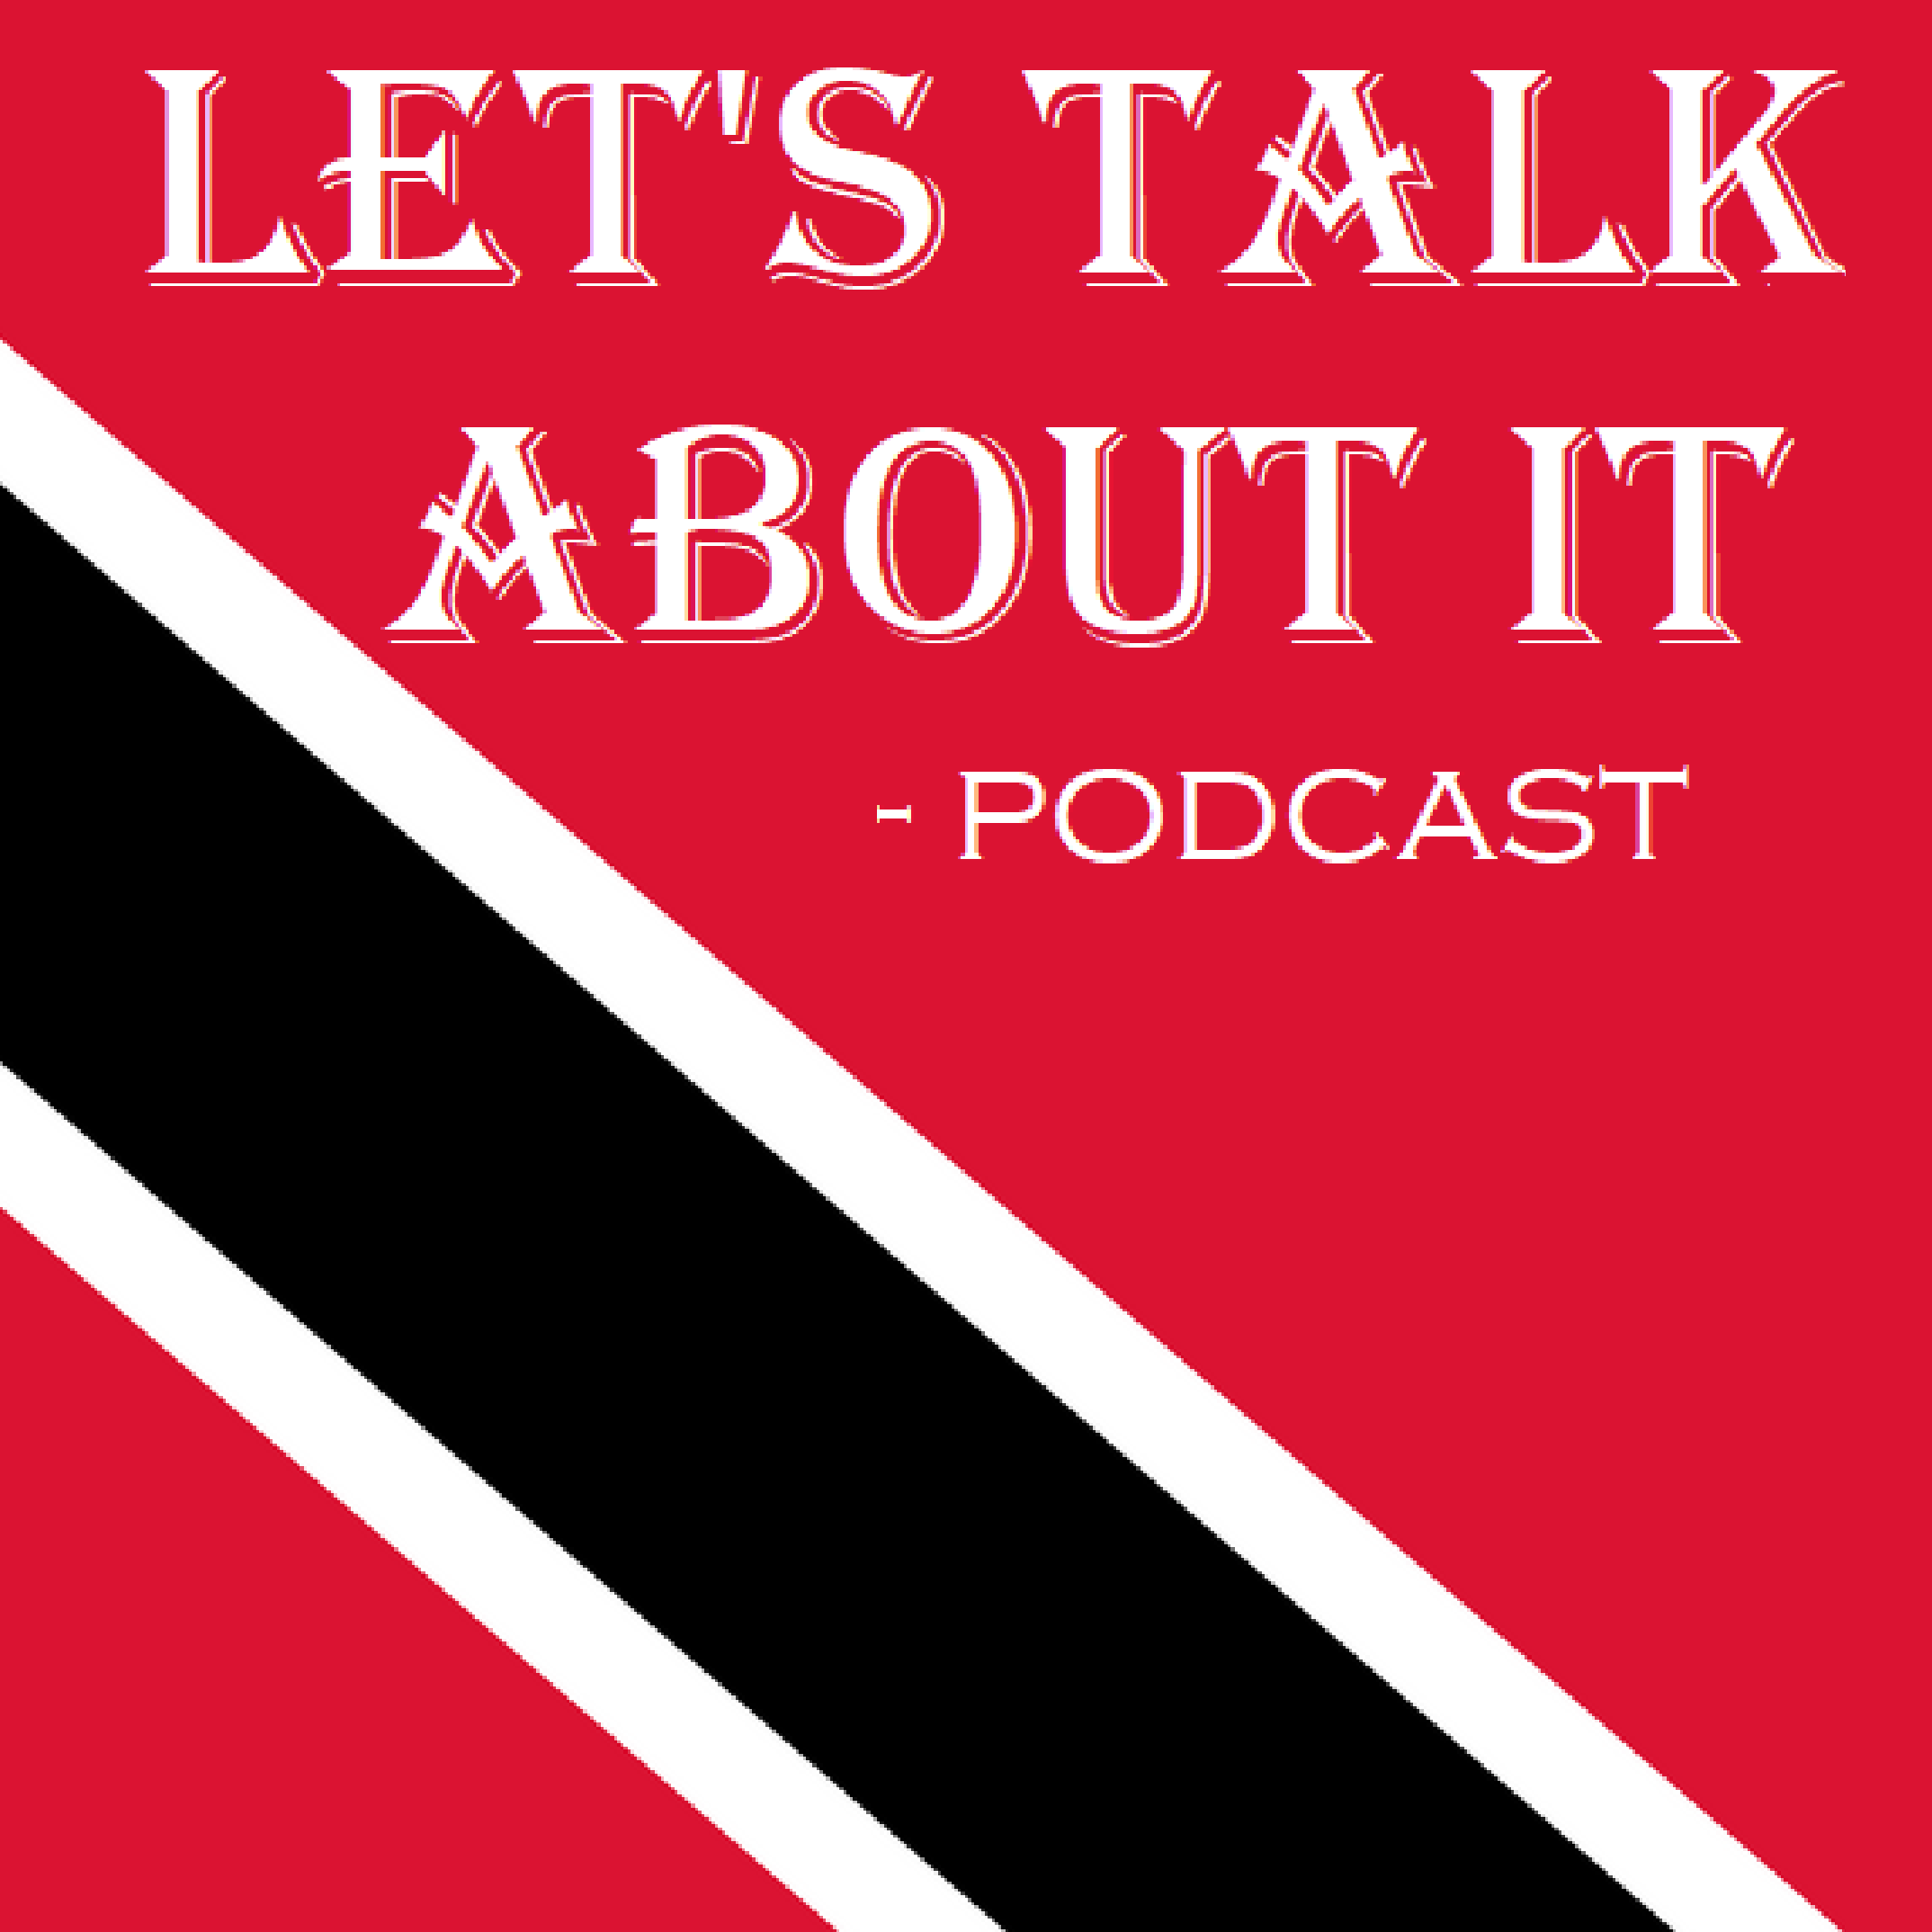 Let's Talk About it Podcast written on the Trinidad Flag